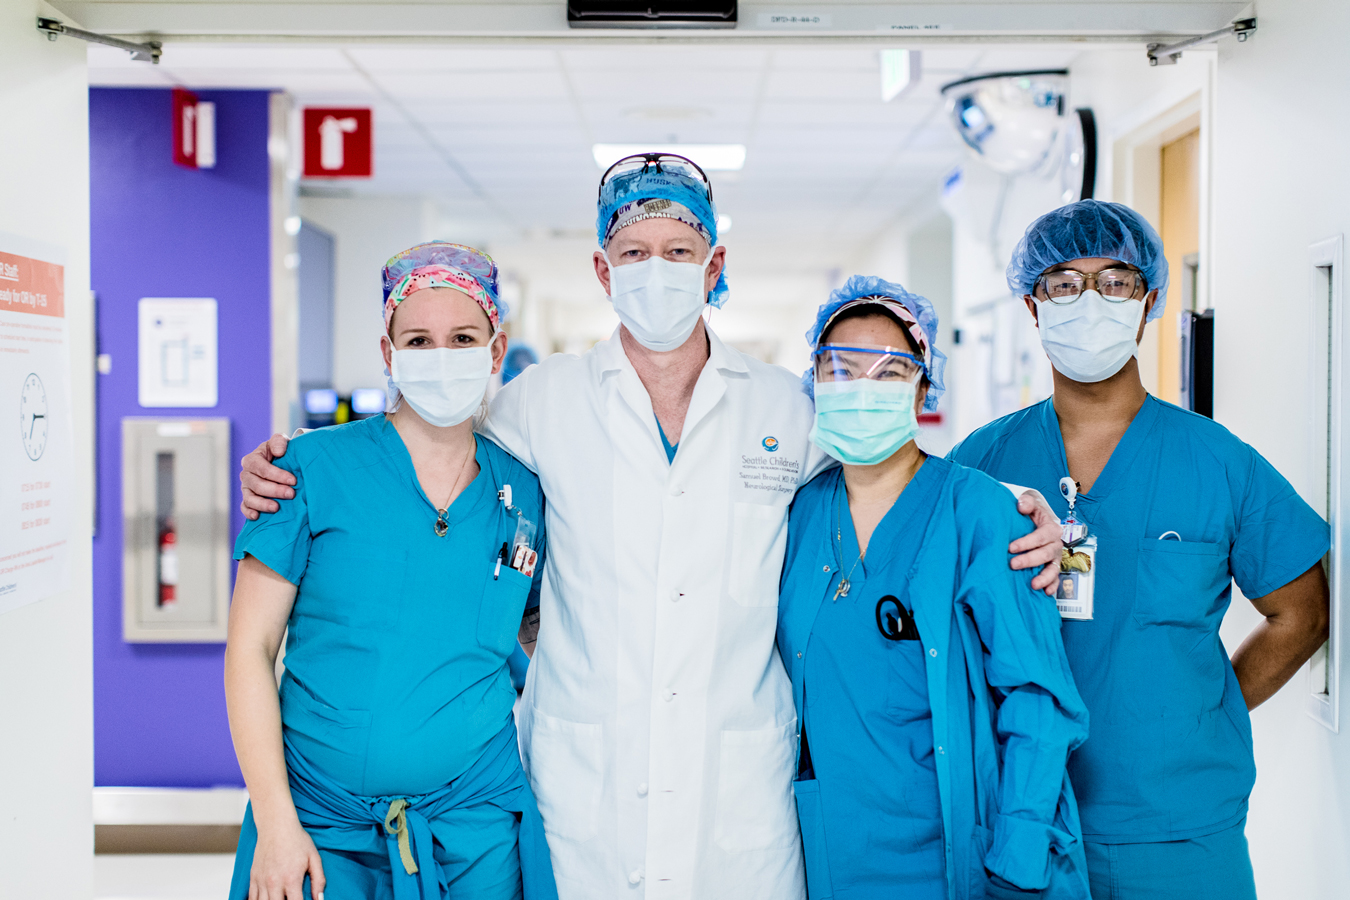 Dr. Browd and team pose in masks and scrubs